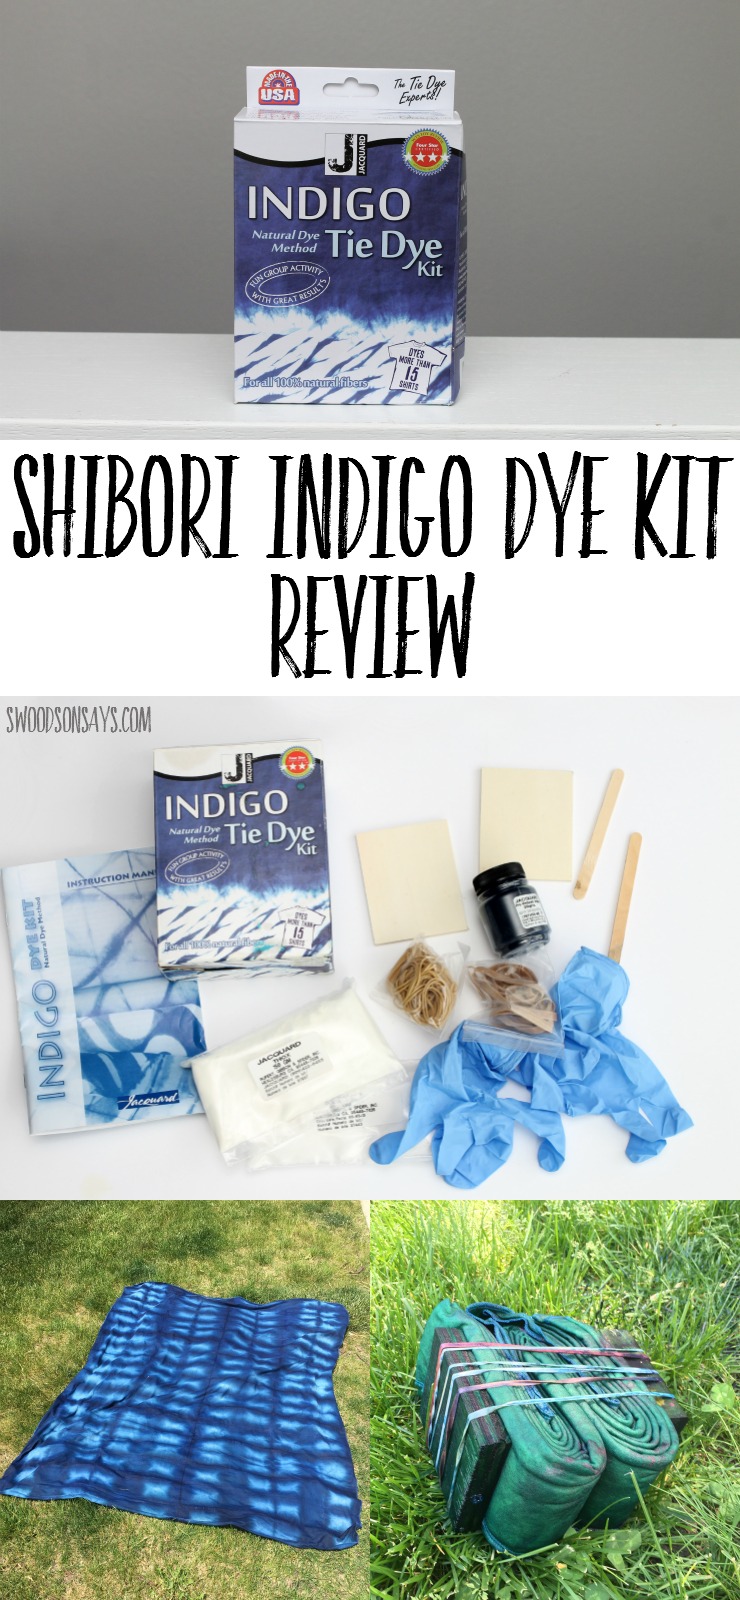 Shibori Indigo Dye Kit Review - see what is inside this cheap kit, that dyes up to 15 shirts! Shibori tie dye kits make it simple and easy to experiment with natural indigo dye.